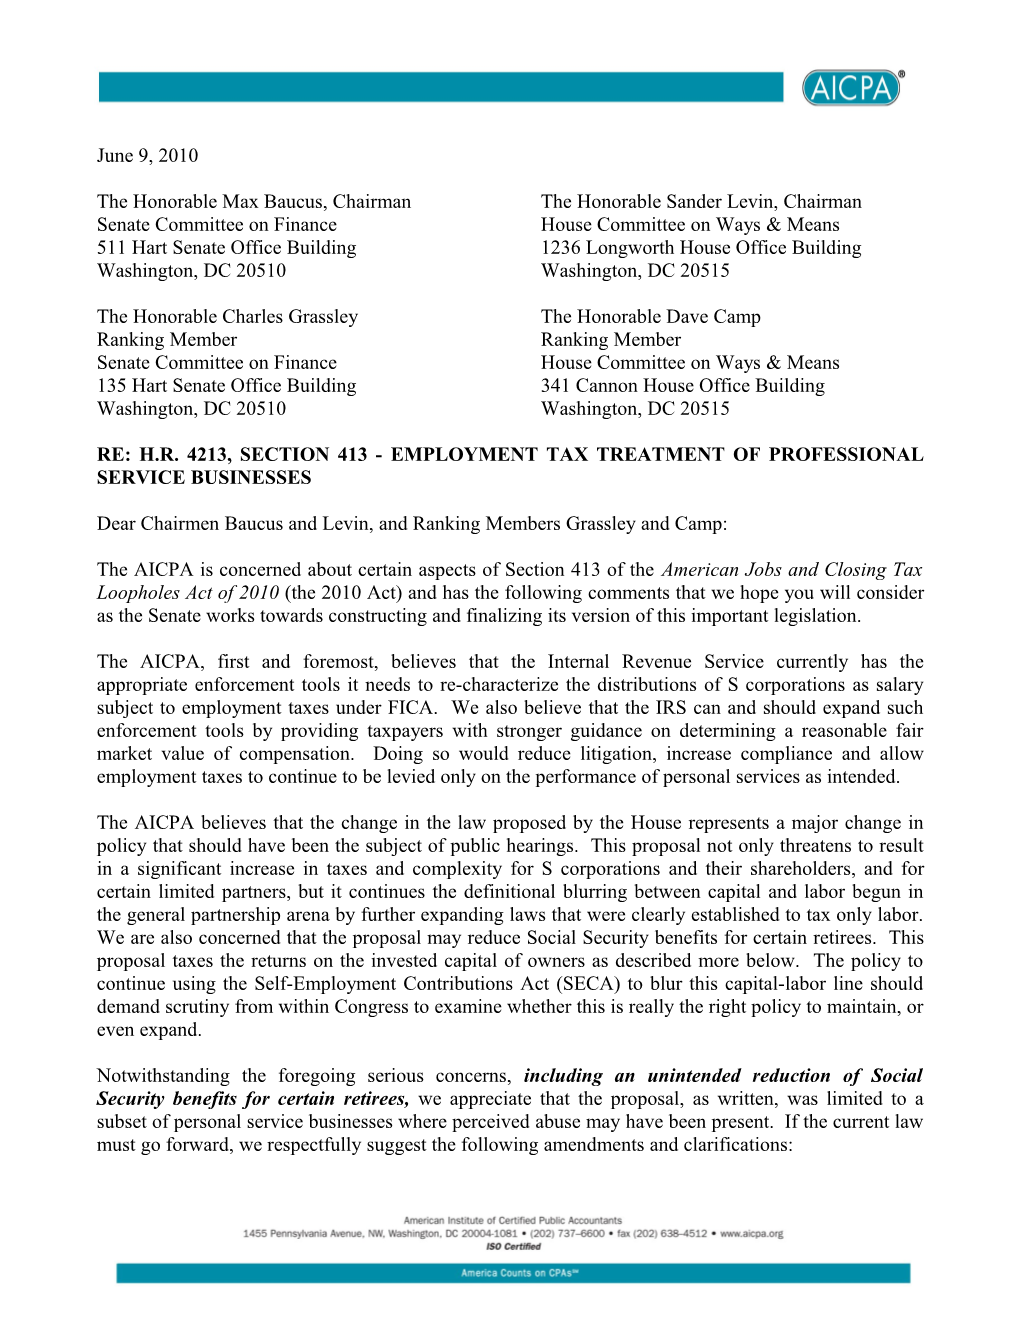 Letter to Congress Commenting on S Corp Self-Employment Tax Proposal June 9, 2010